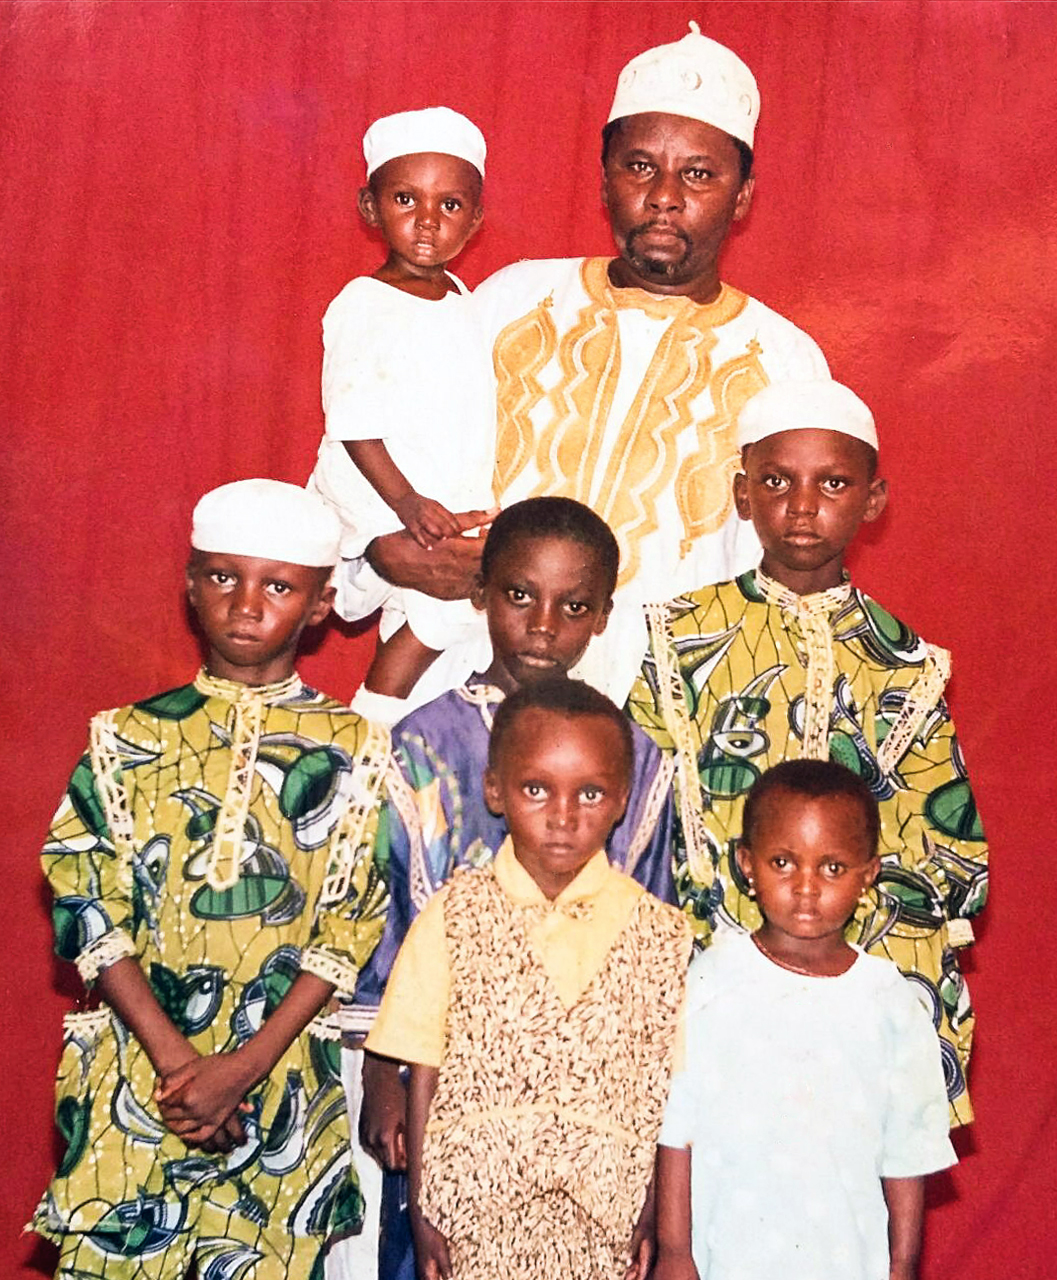 A young Ismail Jatta with his father, three brothers and cousins in his native Gambia, West Africa. Ismail is the tallest at the right.